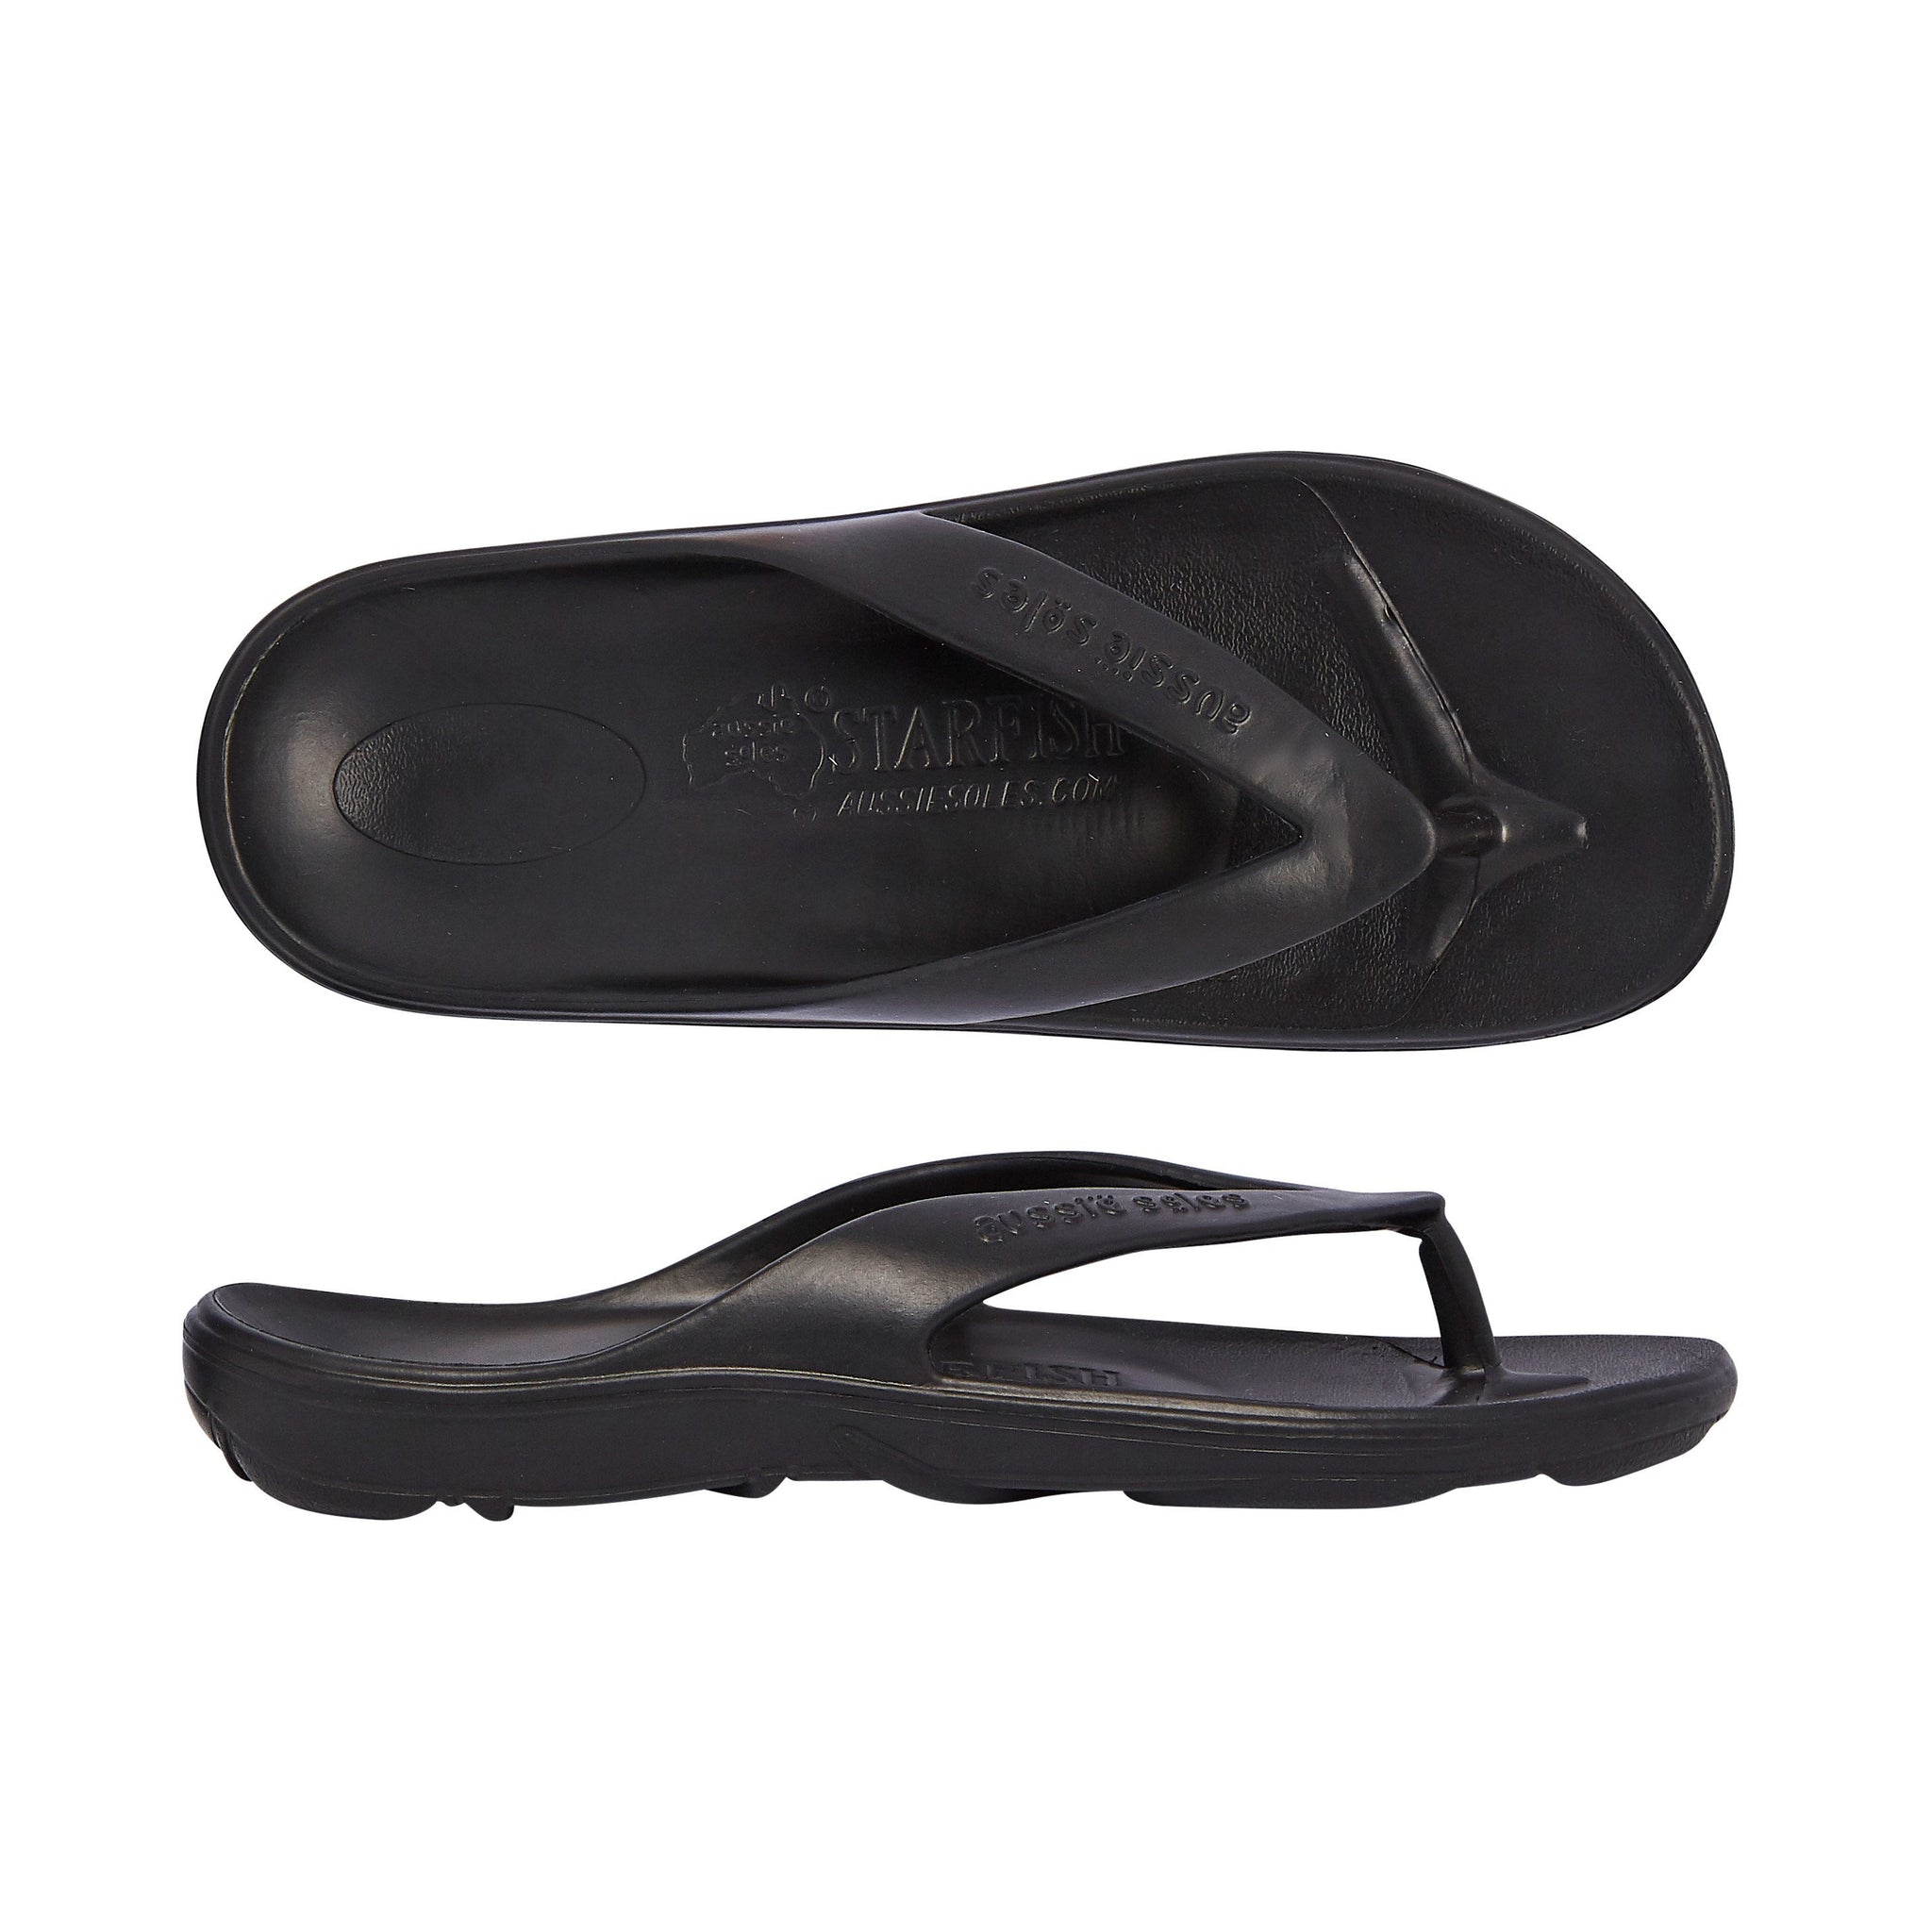 arch support thongs australia